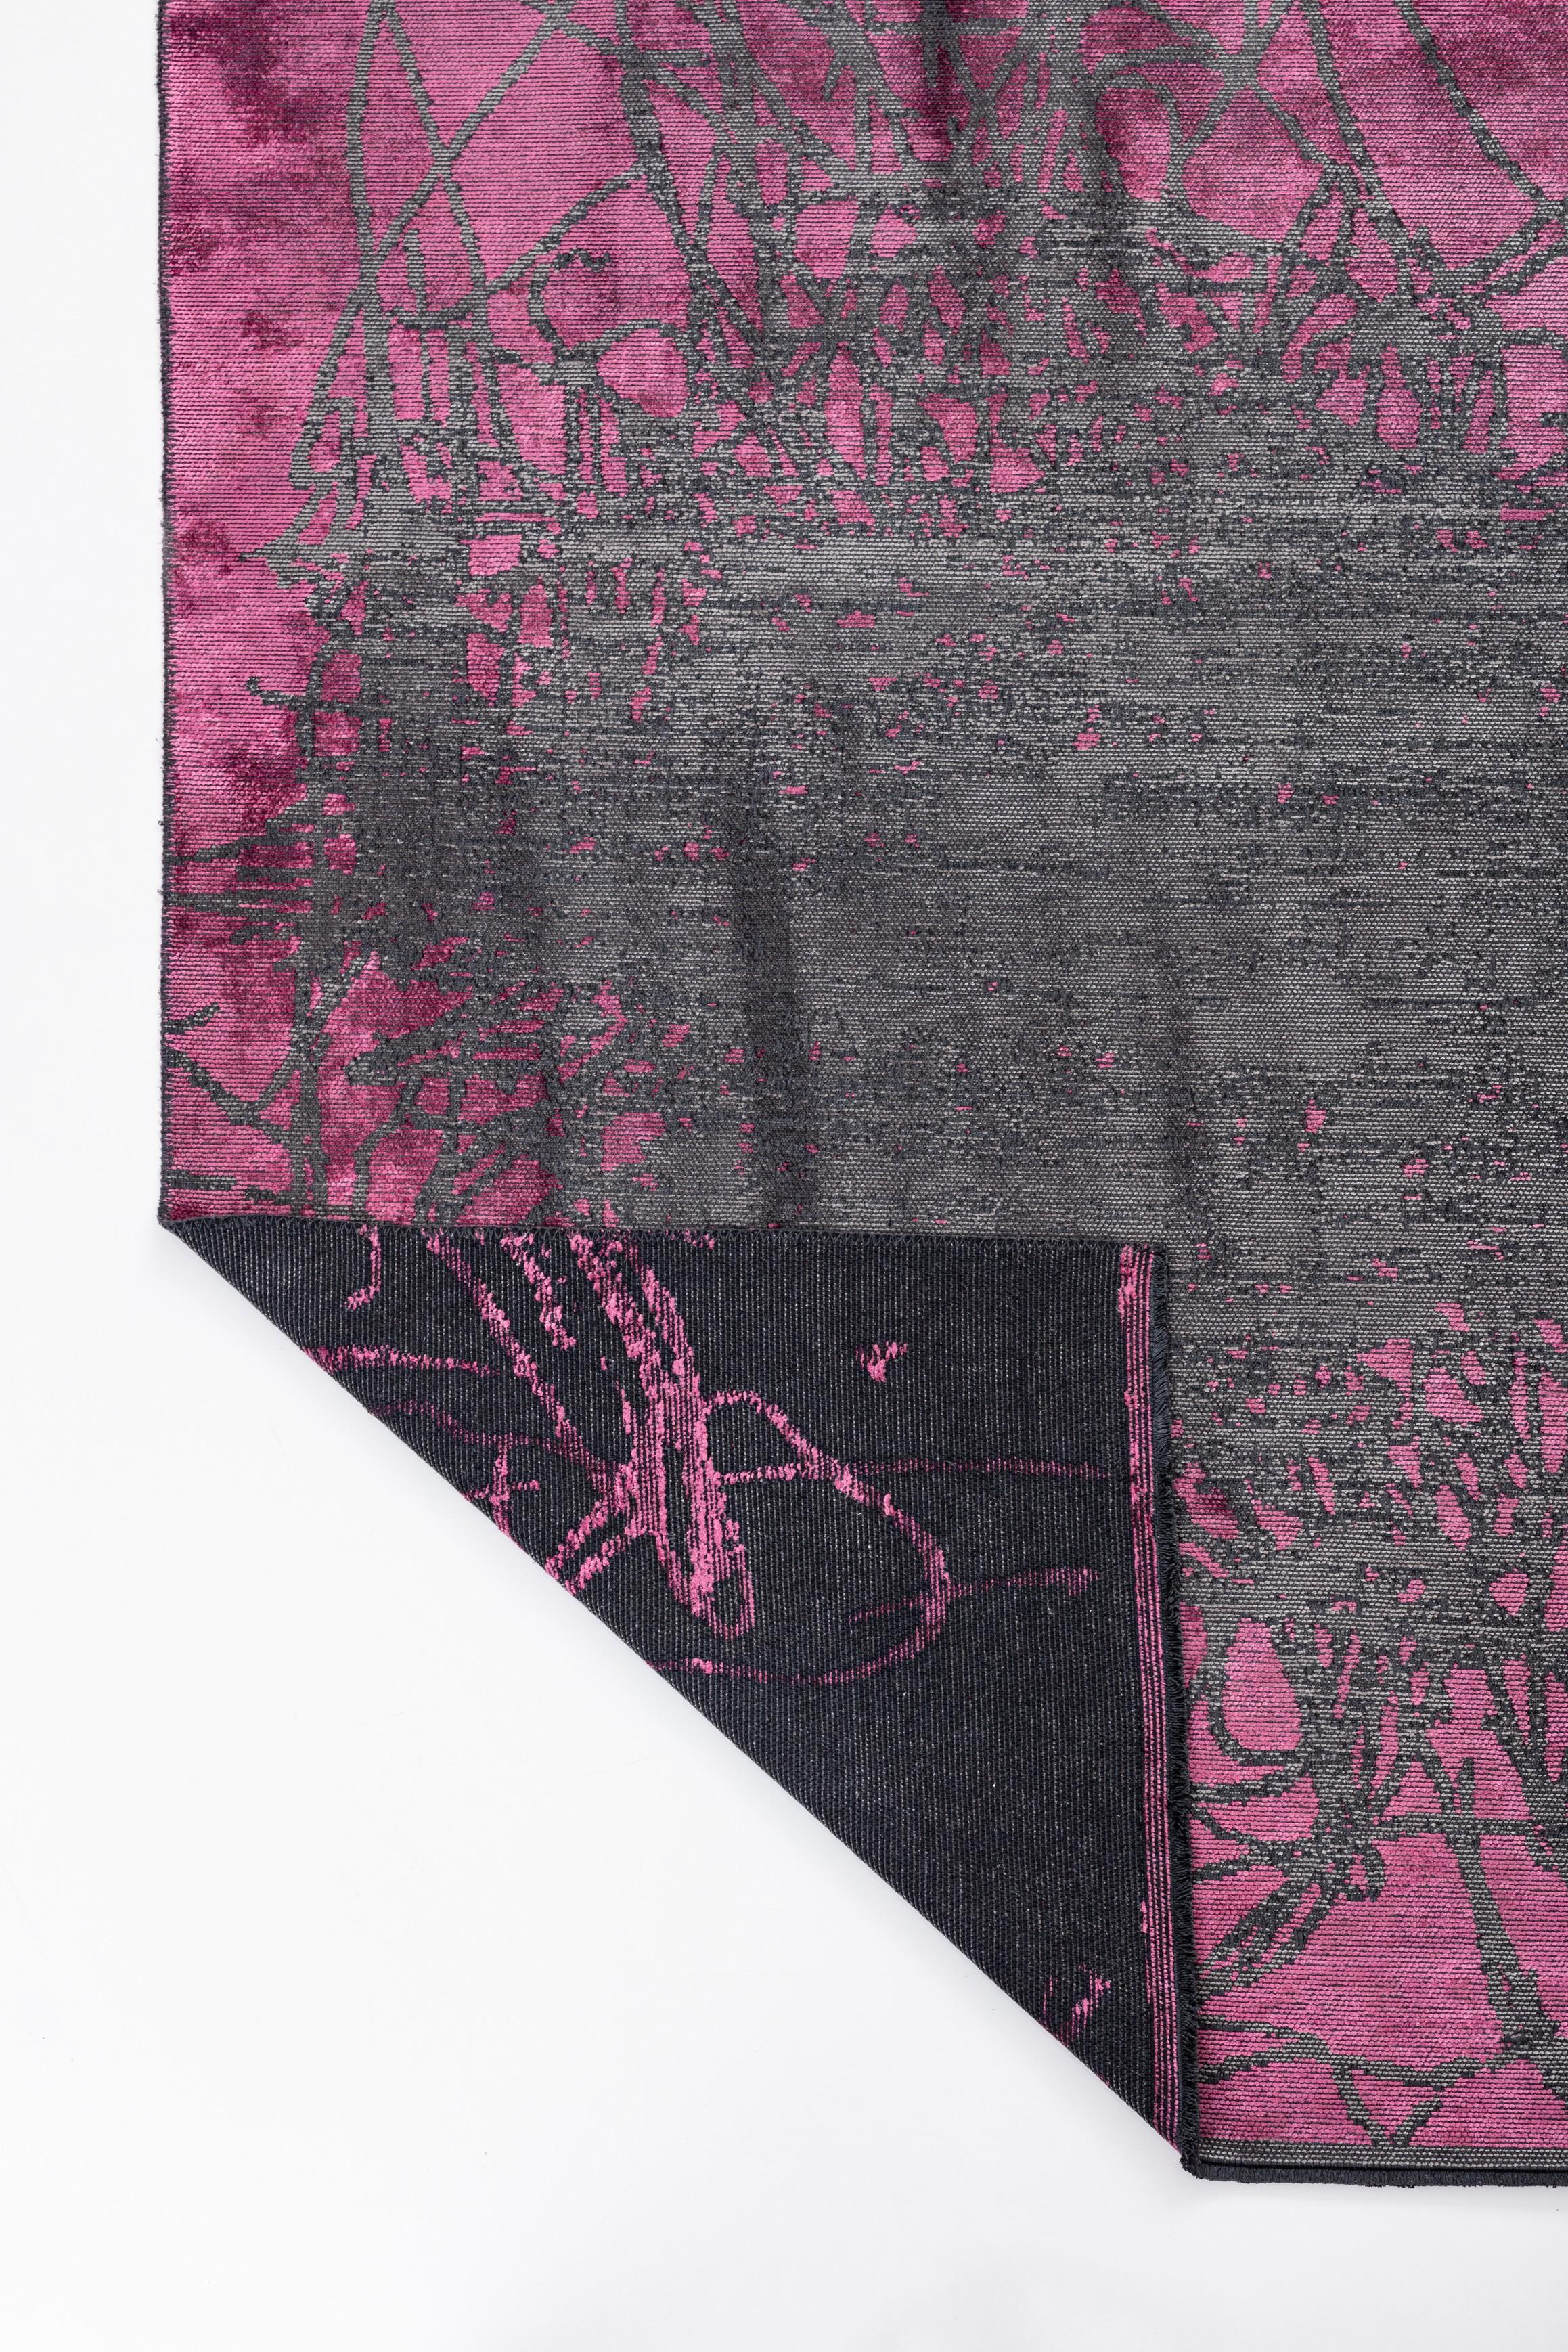 For Sale:  (Pink) Modern  Abstract Luxury Area Rug 3